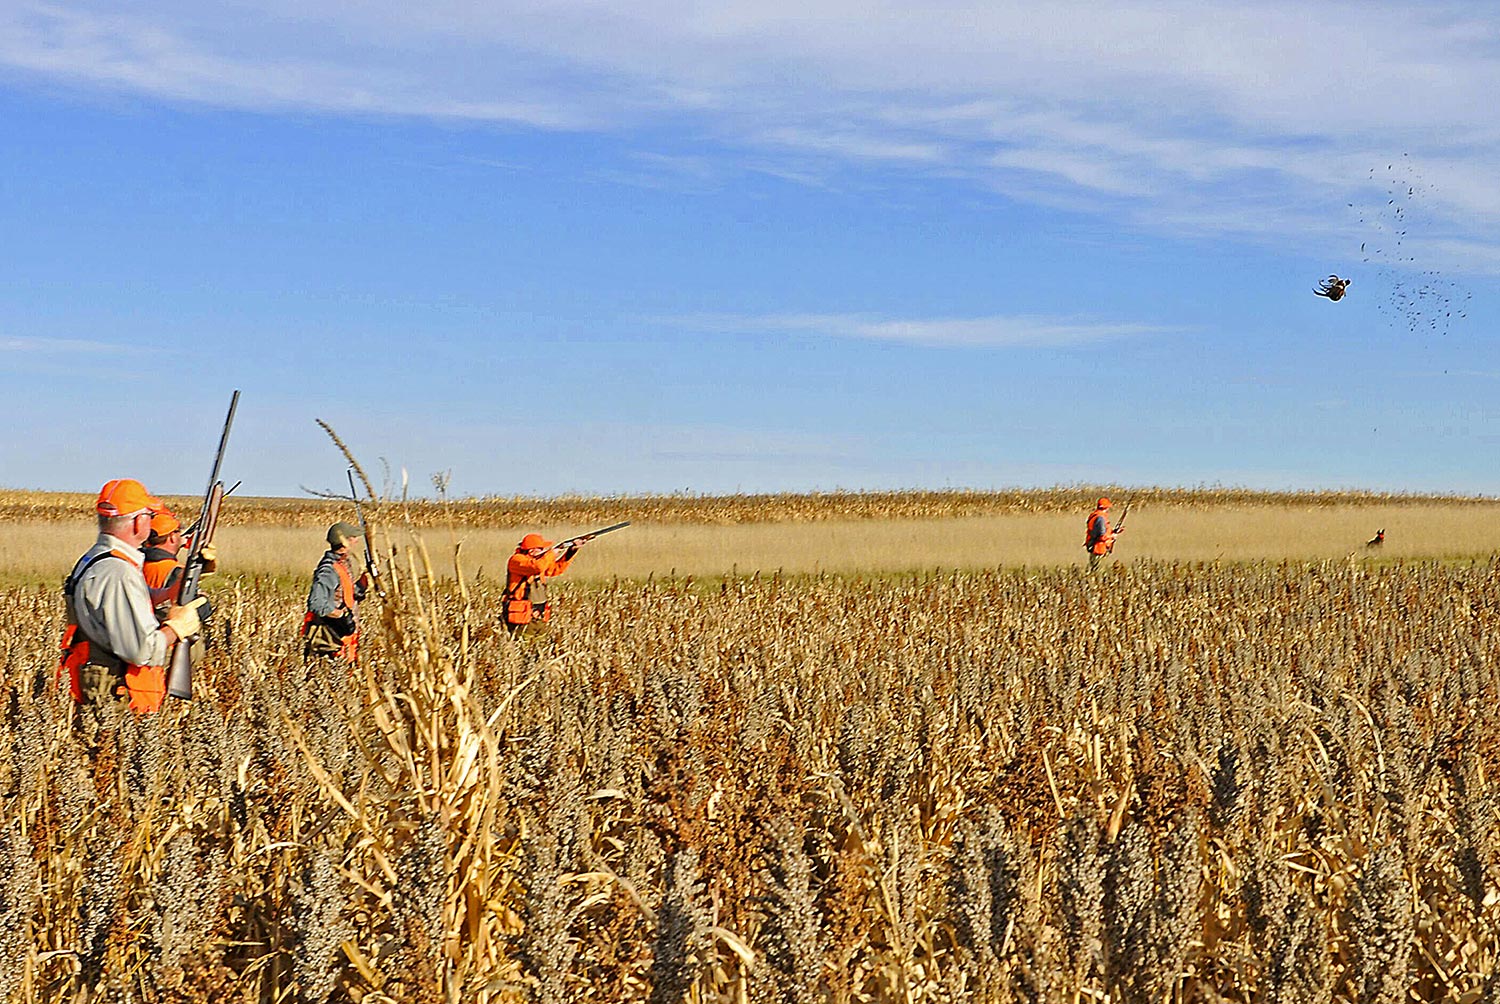 Hunters in a field pheasant hunting.